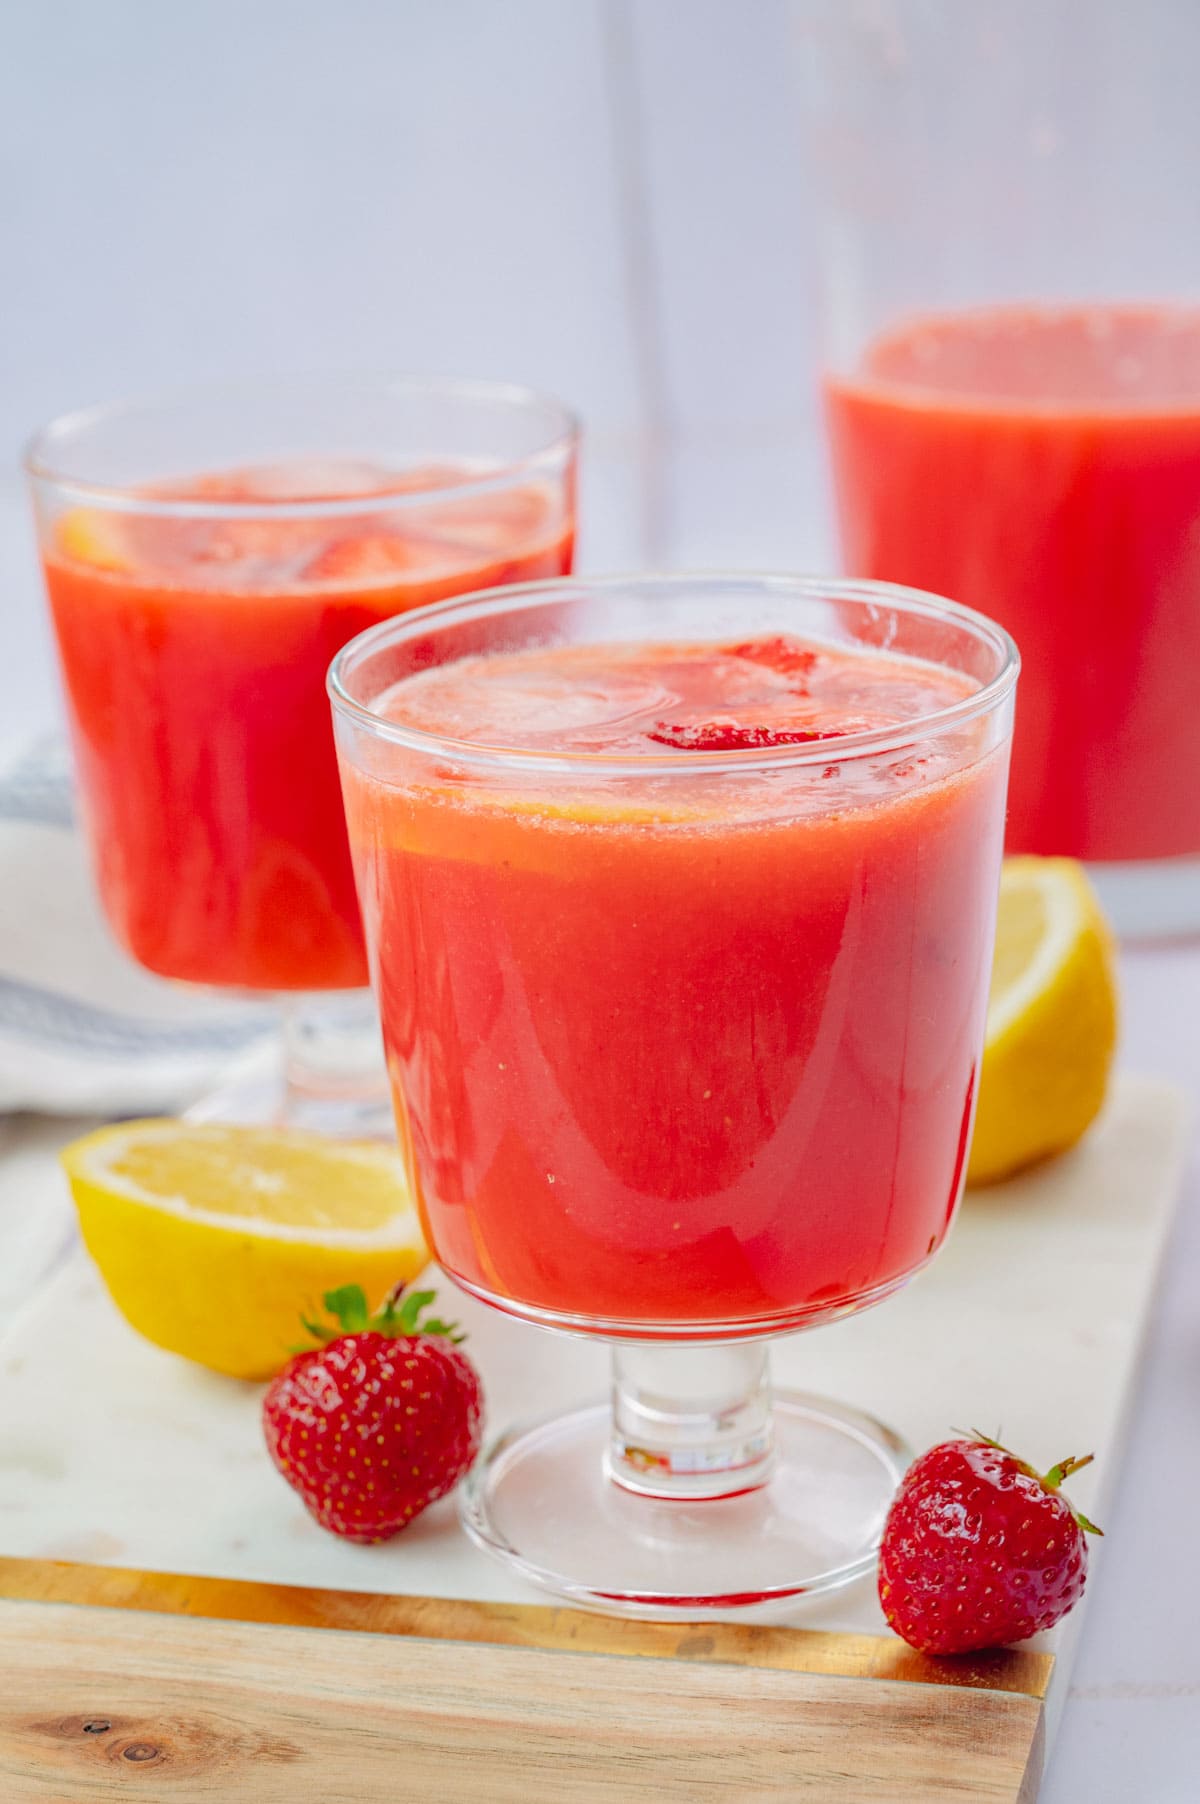 Two glasses with strawberry lemonade. Strawberries and lemons in the background.